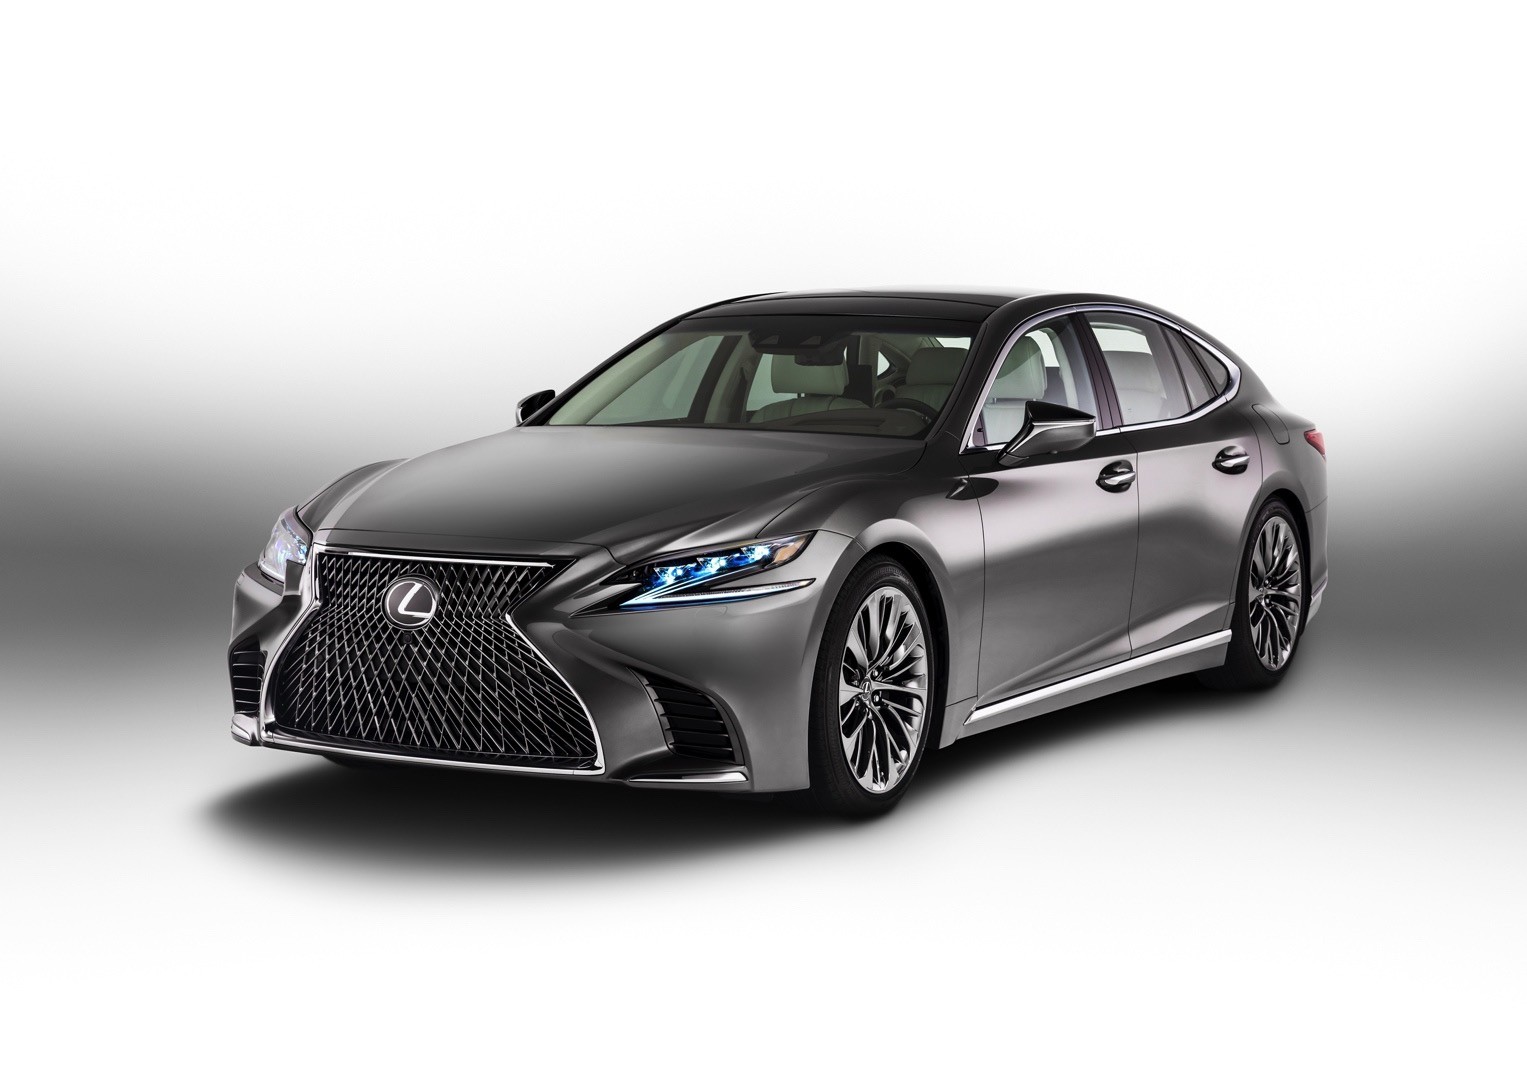 entry-level-2018-lexus-ls-350-launched-in-china-with-35-liter-n-a-v6-engine_1.jpg